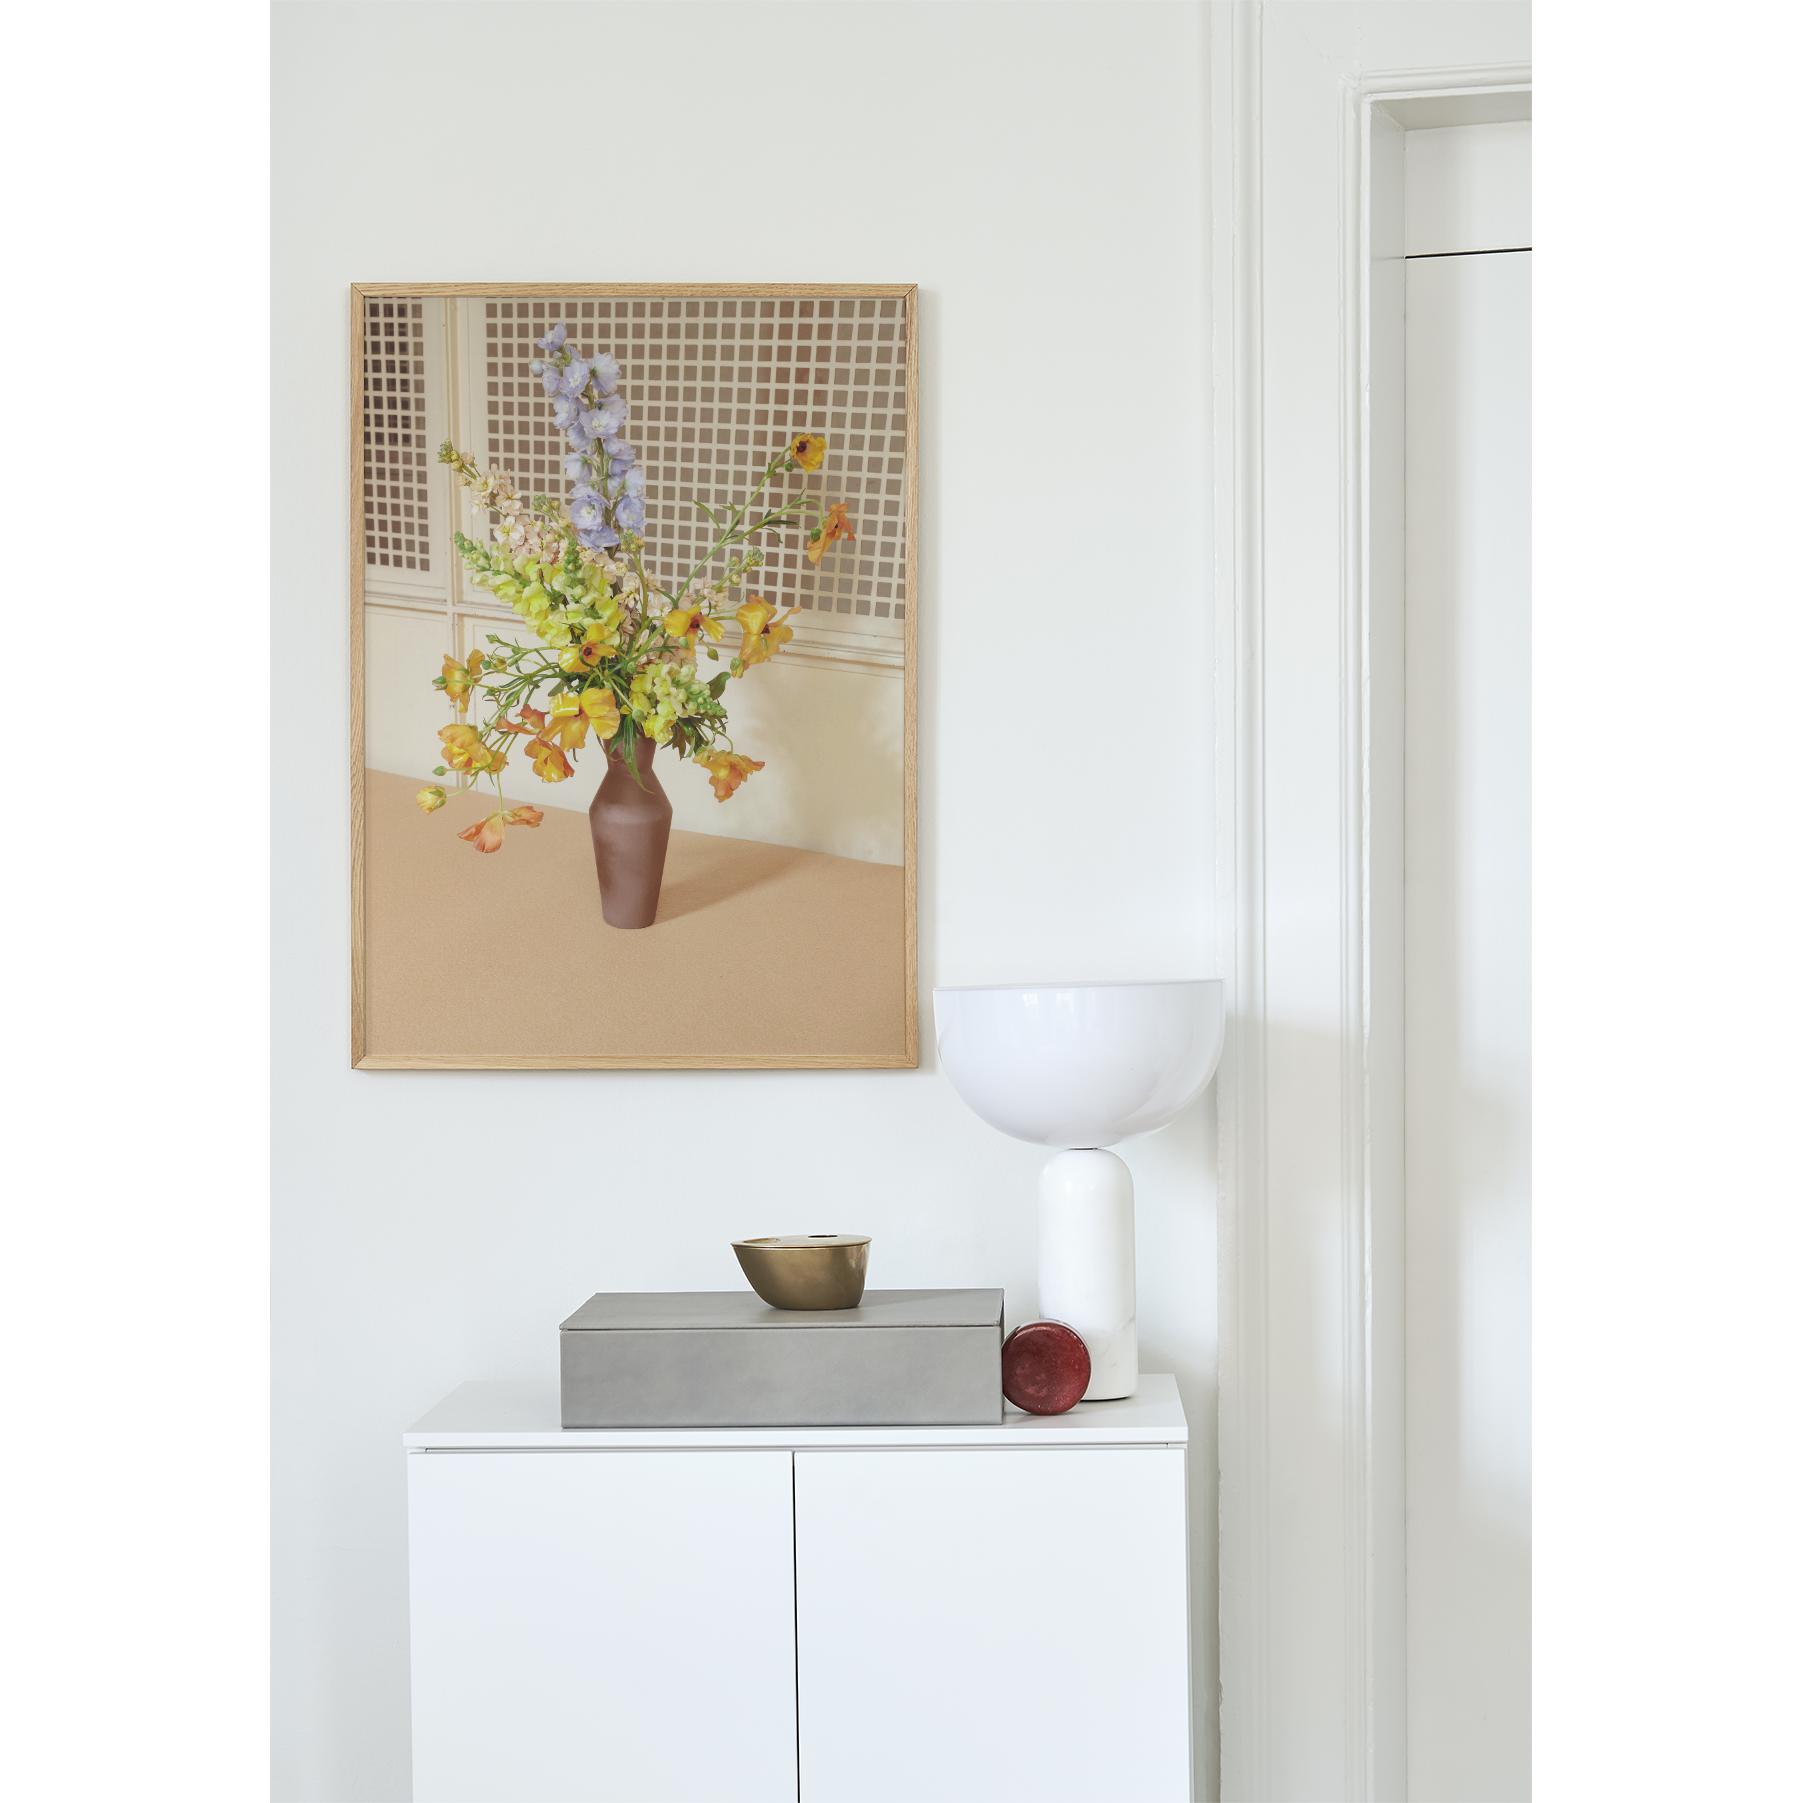 Paper Collective Blomst 06 Poster 50x70 Cm, Beige